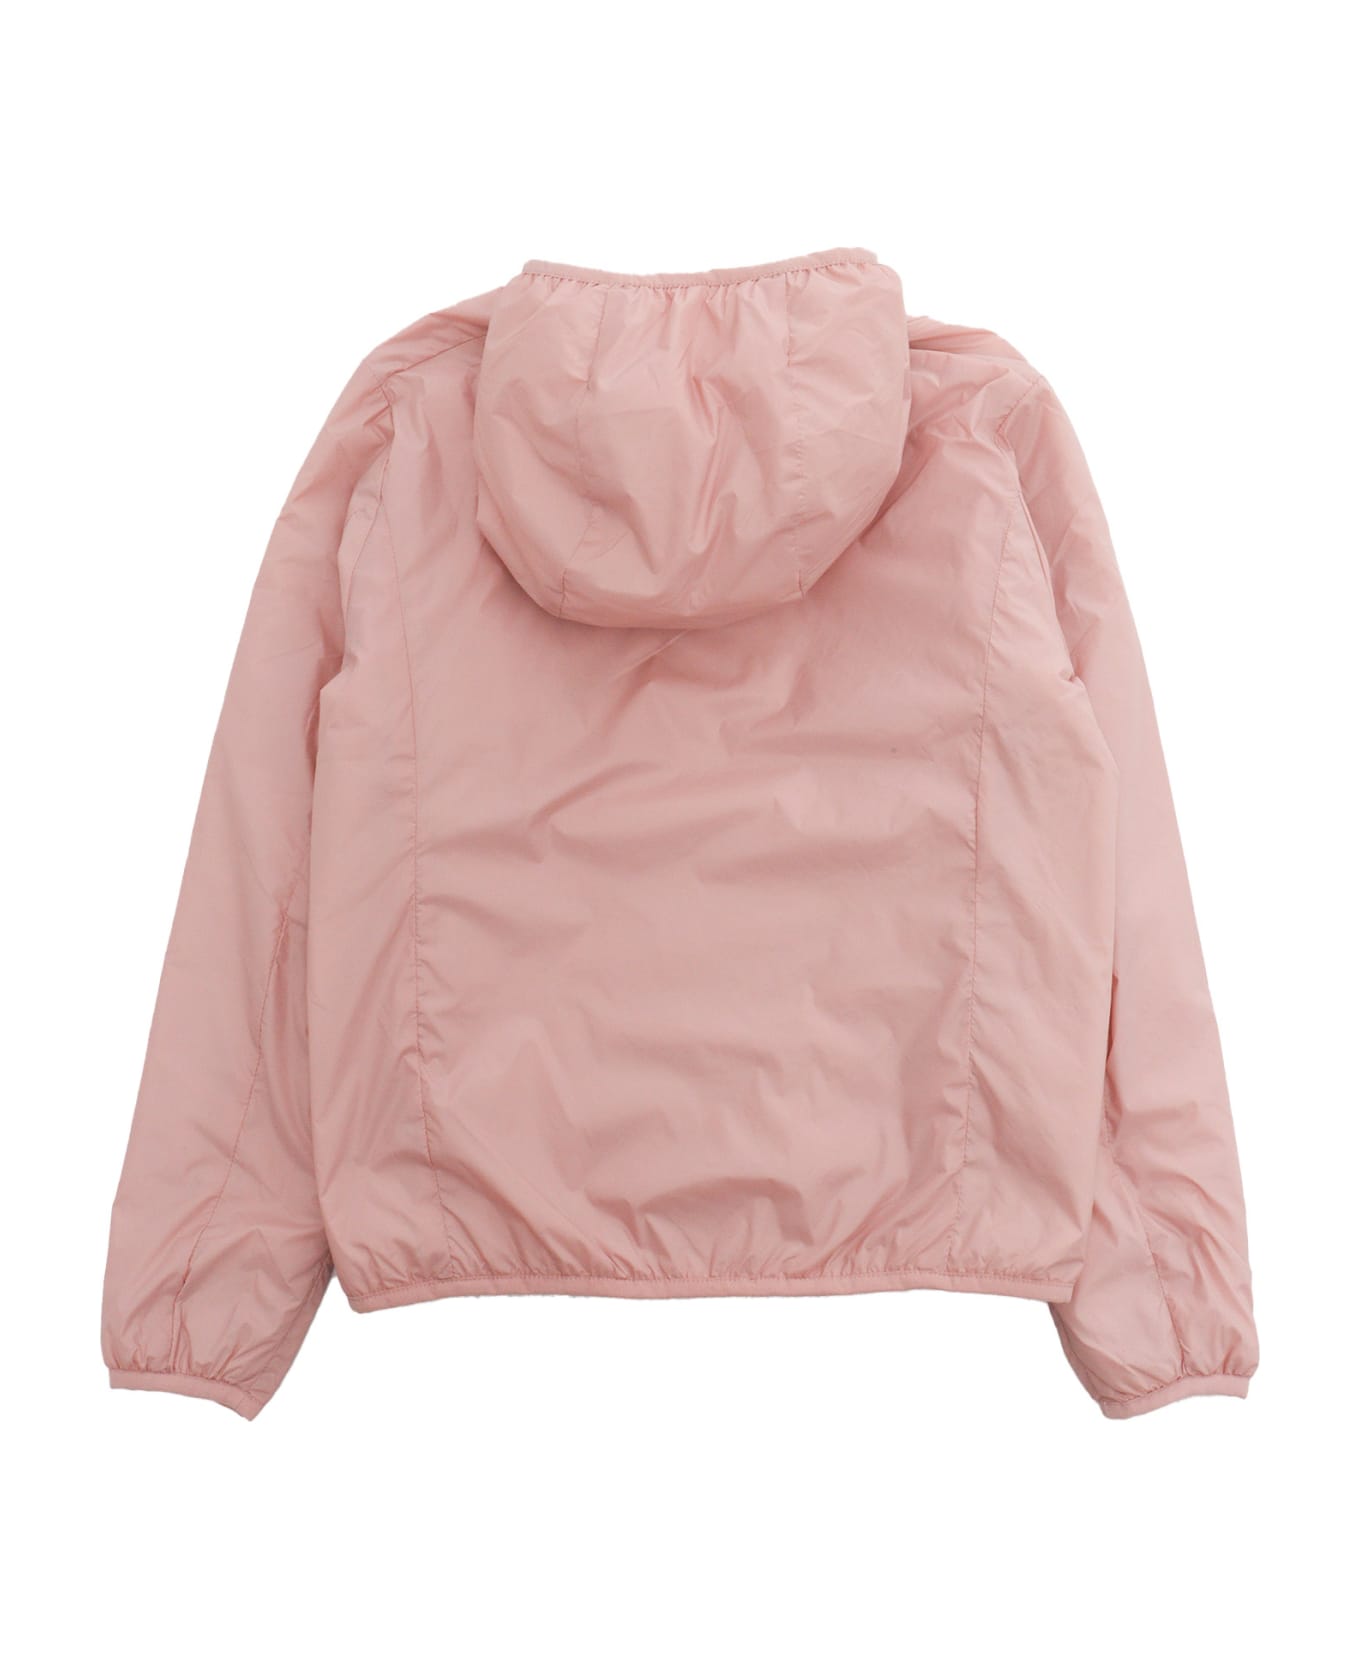 Save the Duck Pink Shilo Jacket - PINK コート＆ジャケット